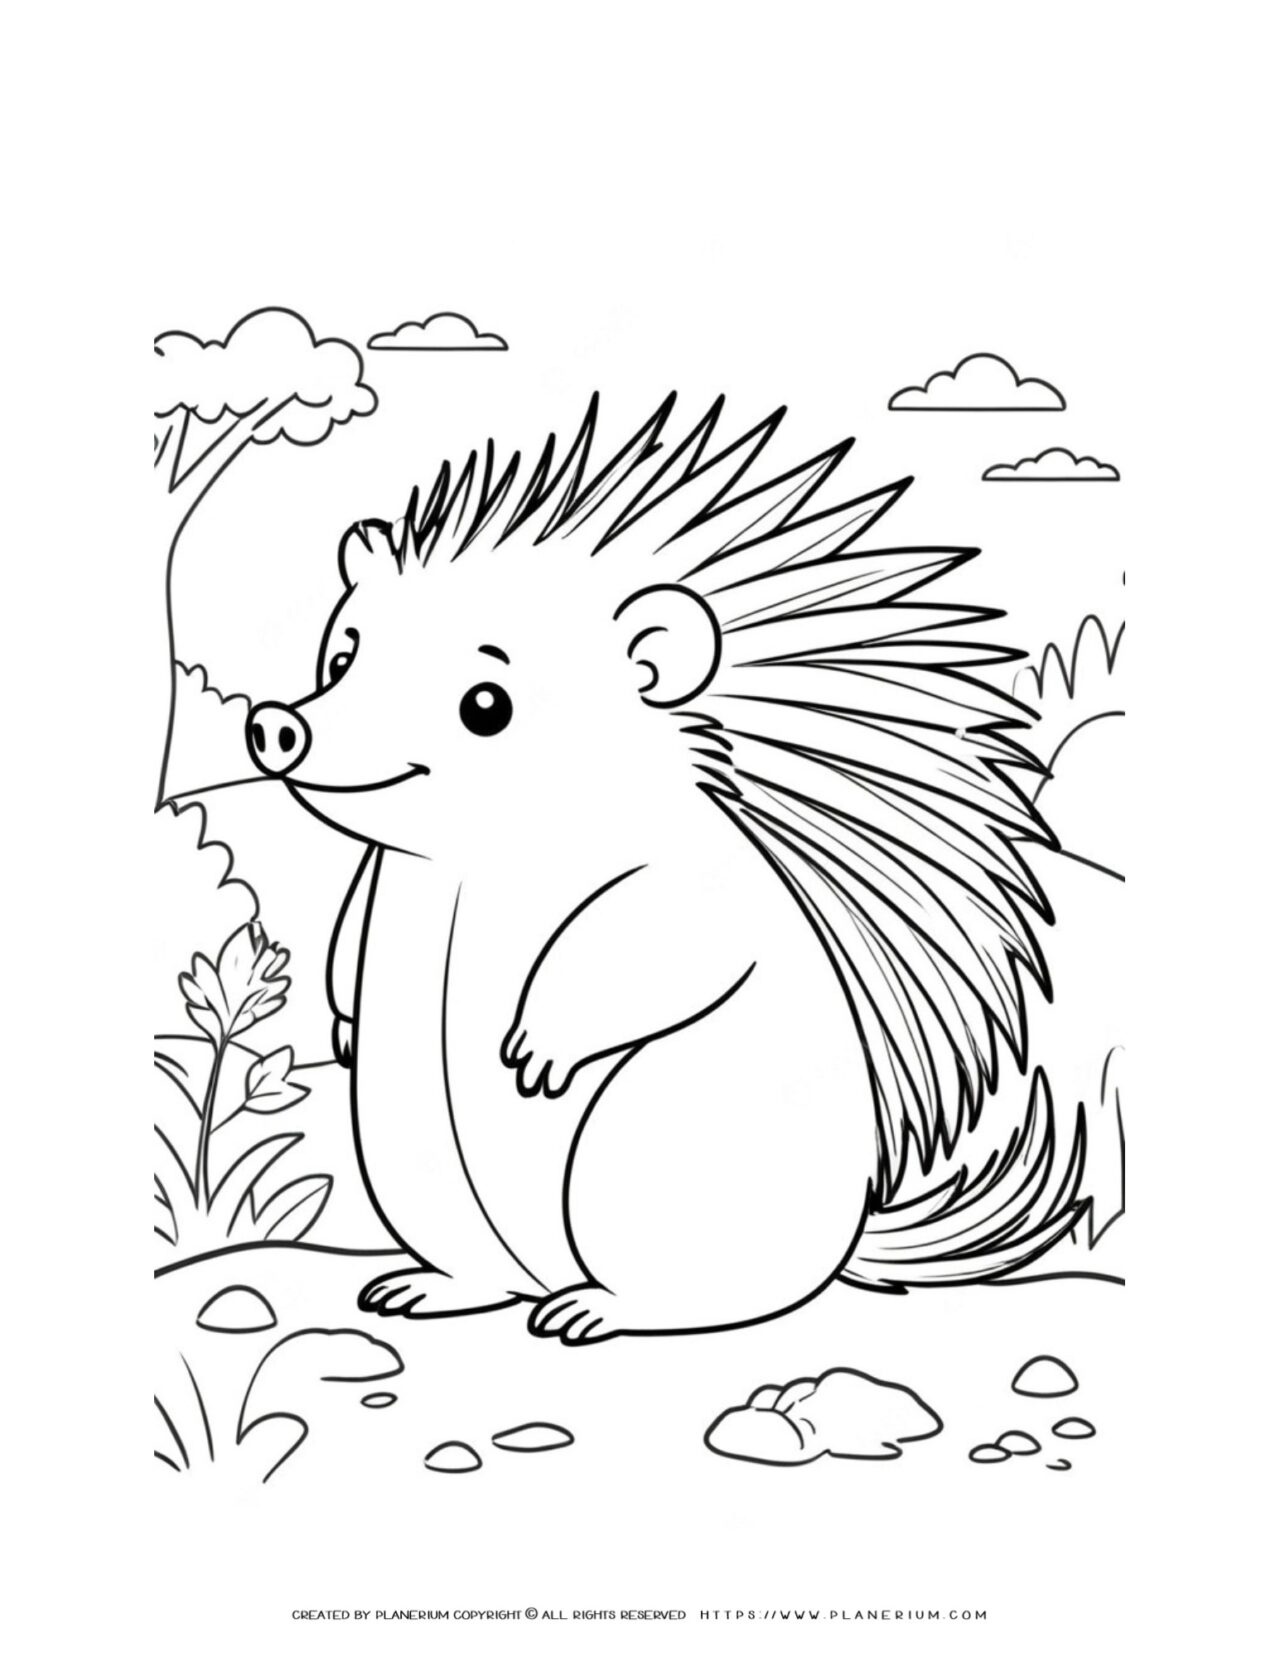 happy-porcupine-in-nature-illustration-coloring-page-for-kids